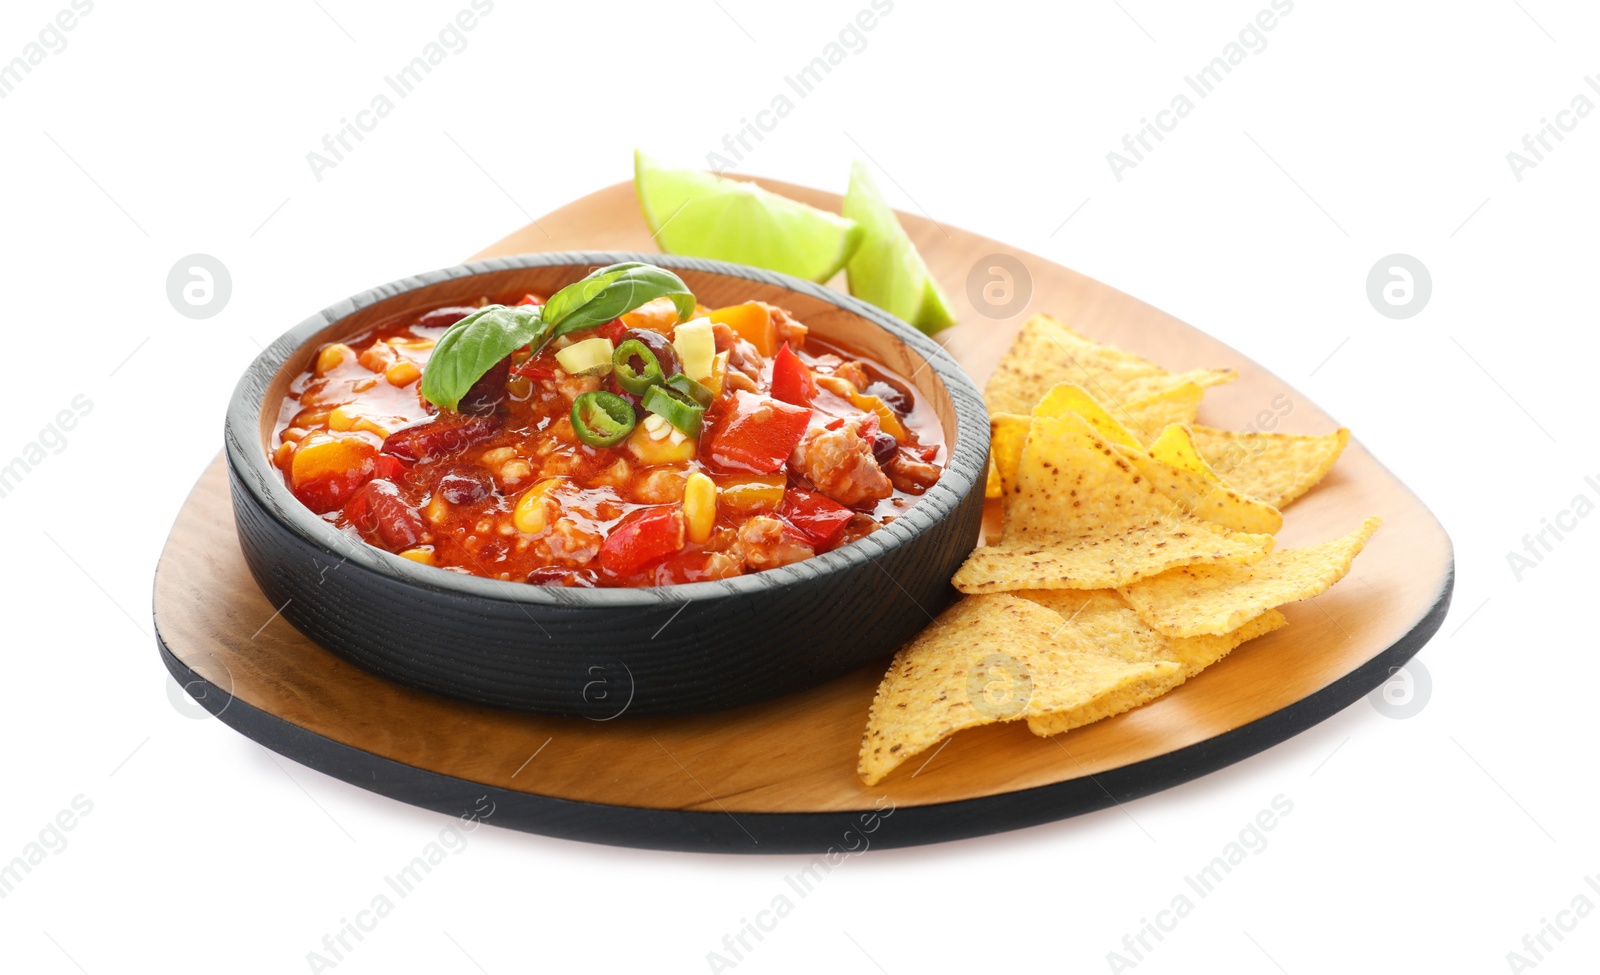 Photo of Plate with chili con carne and nachos on white background